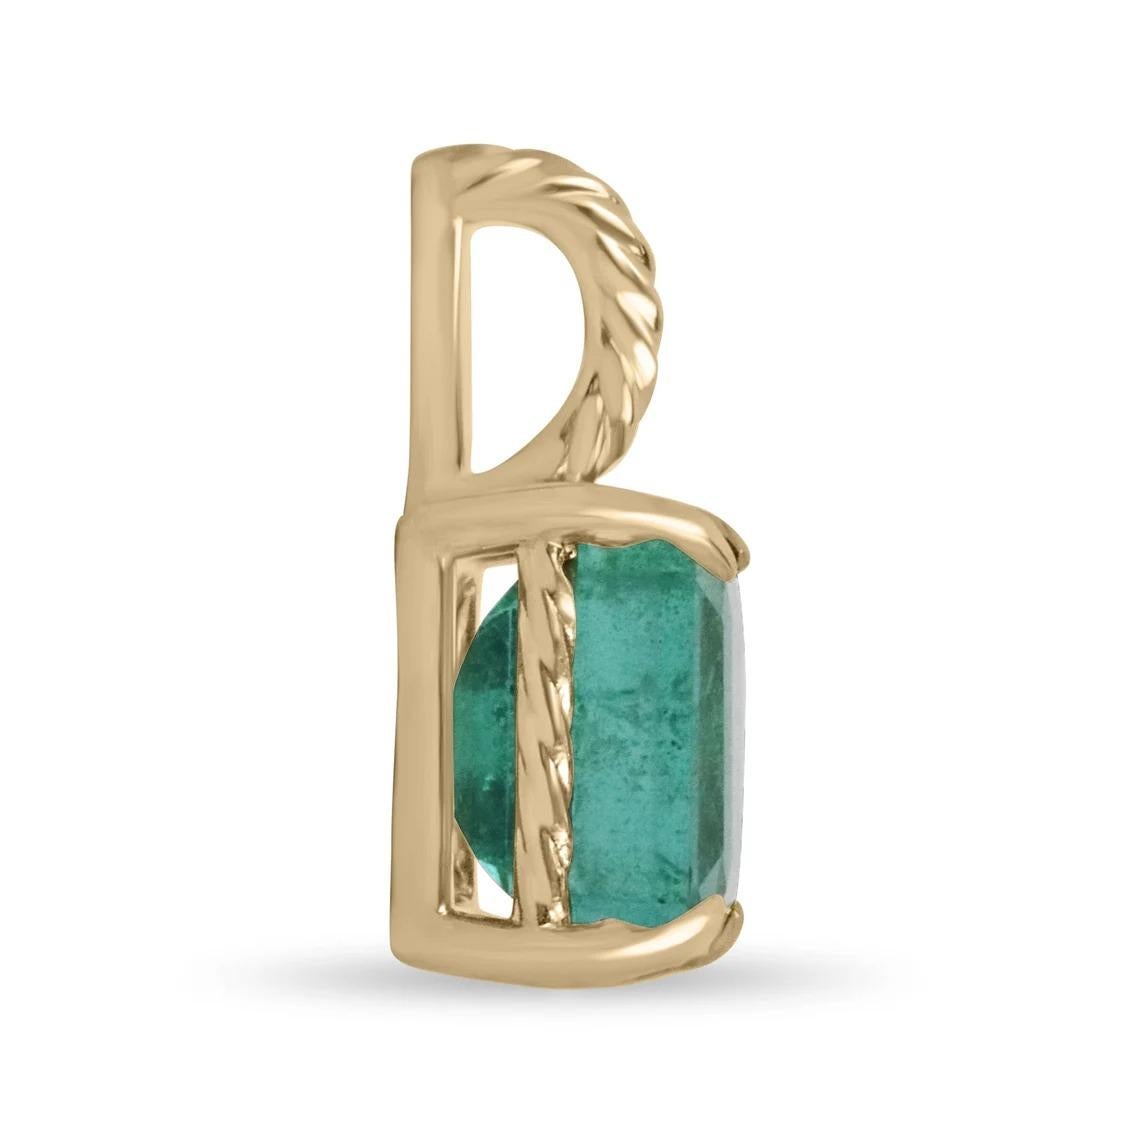 Featured here is a stunning emerald cut Zambian emerald pendant in fine 14K yellow gold. Displayed in the center is a lush bluish-green emerald with very good clarity, accented by a simple four-prong gold mount, allowing for the emerald to be shown